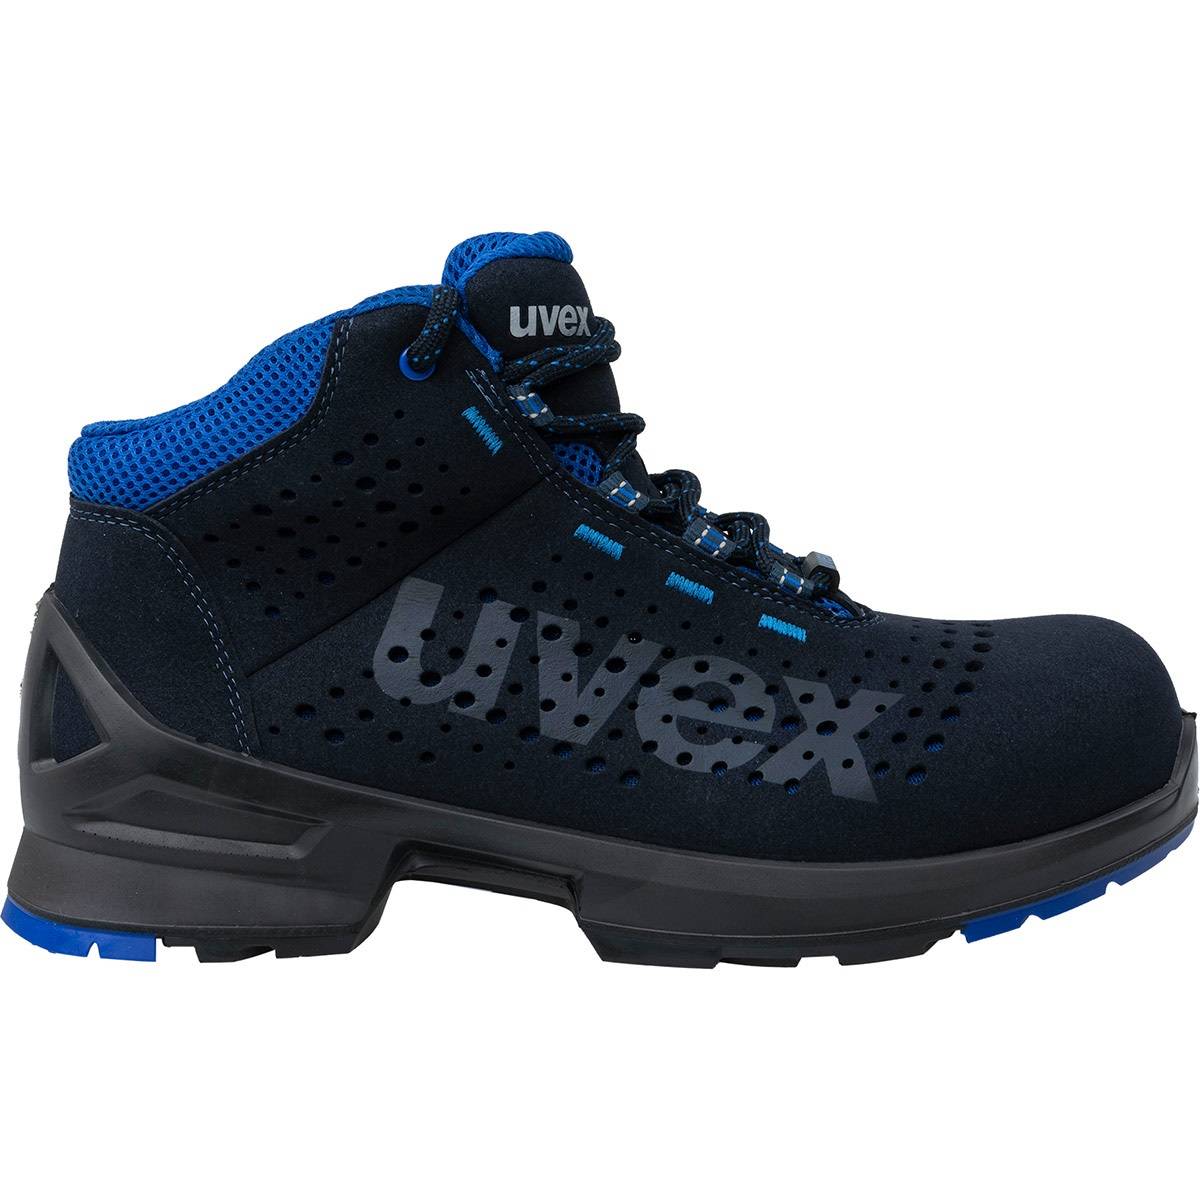 uvex 1 safety boots blue perforated microsuede upper S1 SRC 85328 lace-up, composite toe, protexU